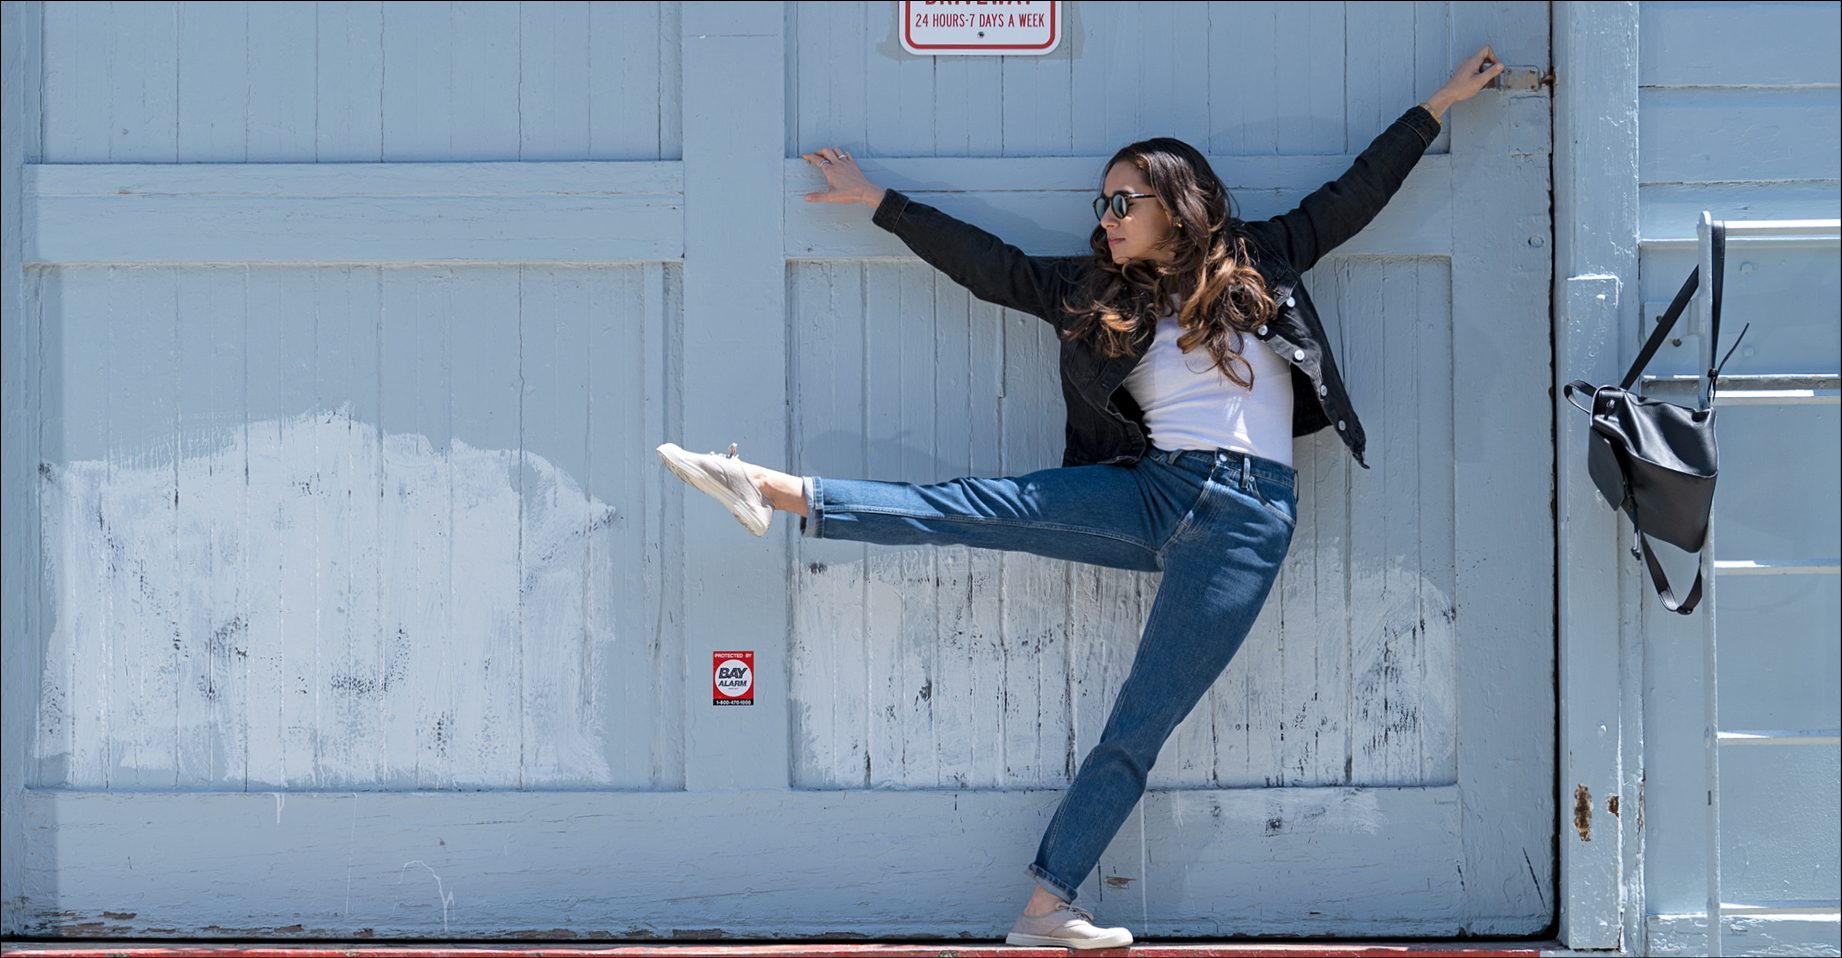 Tess Lane poses in a white t-shirt, black denim jacket, blue jeans, and light gray sneakers. She leans against a blue gray wooden plank wall holding onto the edge of a plank above her. Her arms are held upward on diagonals. She wears black, round sunglasses and her hair topples over her shoulders in waves as she looks to the right. Her torso leans slightly to the left to counterbalance her outstretched right leg, held a la seconde hip level with her foot pointed. Her left leg supports her on a diagonal as she leans off balance. A black leather backpack hangs on a metal bar to her left by a single strap.